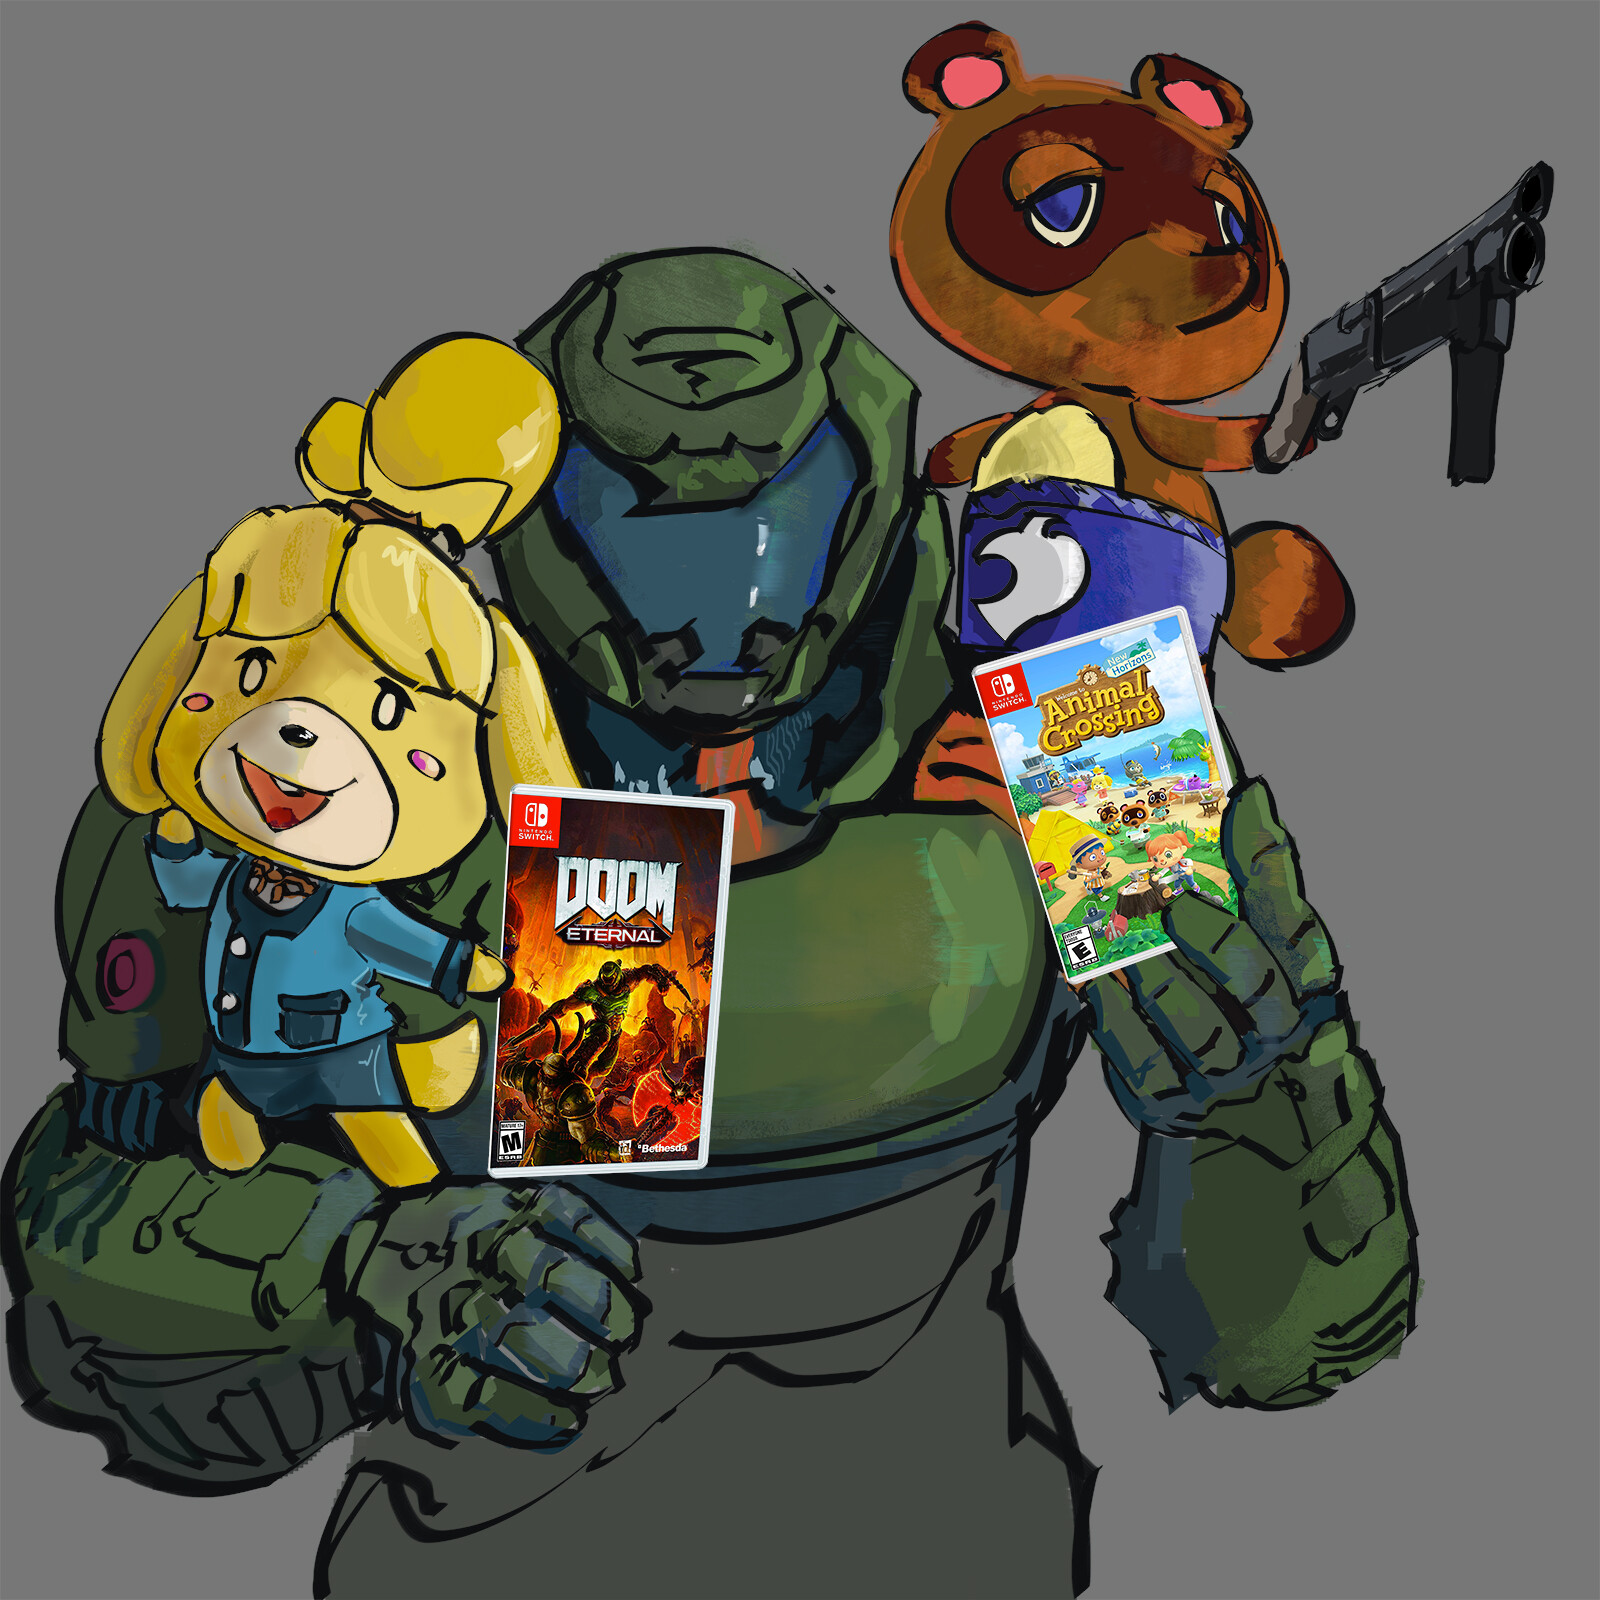 Doom animals. Animal Crossing Isabelle and Doomguy. Doomguy and Isabella. Doom Slayer x Isabelle.